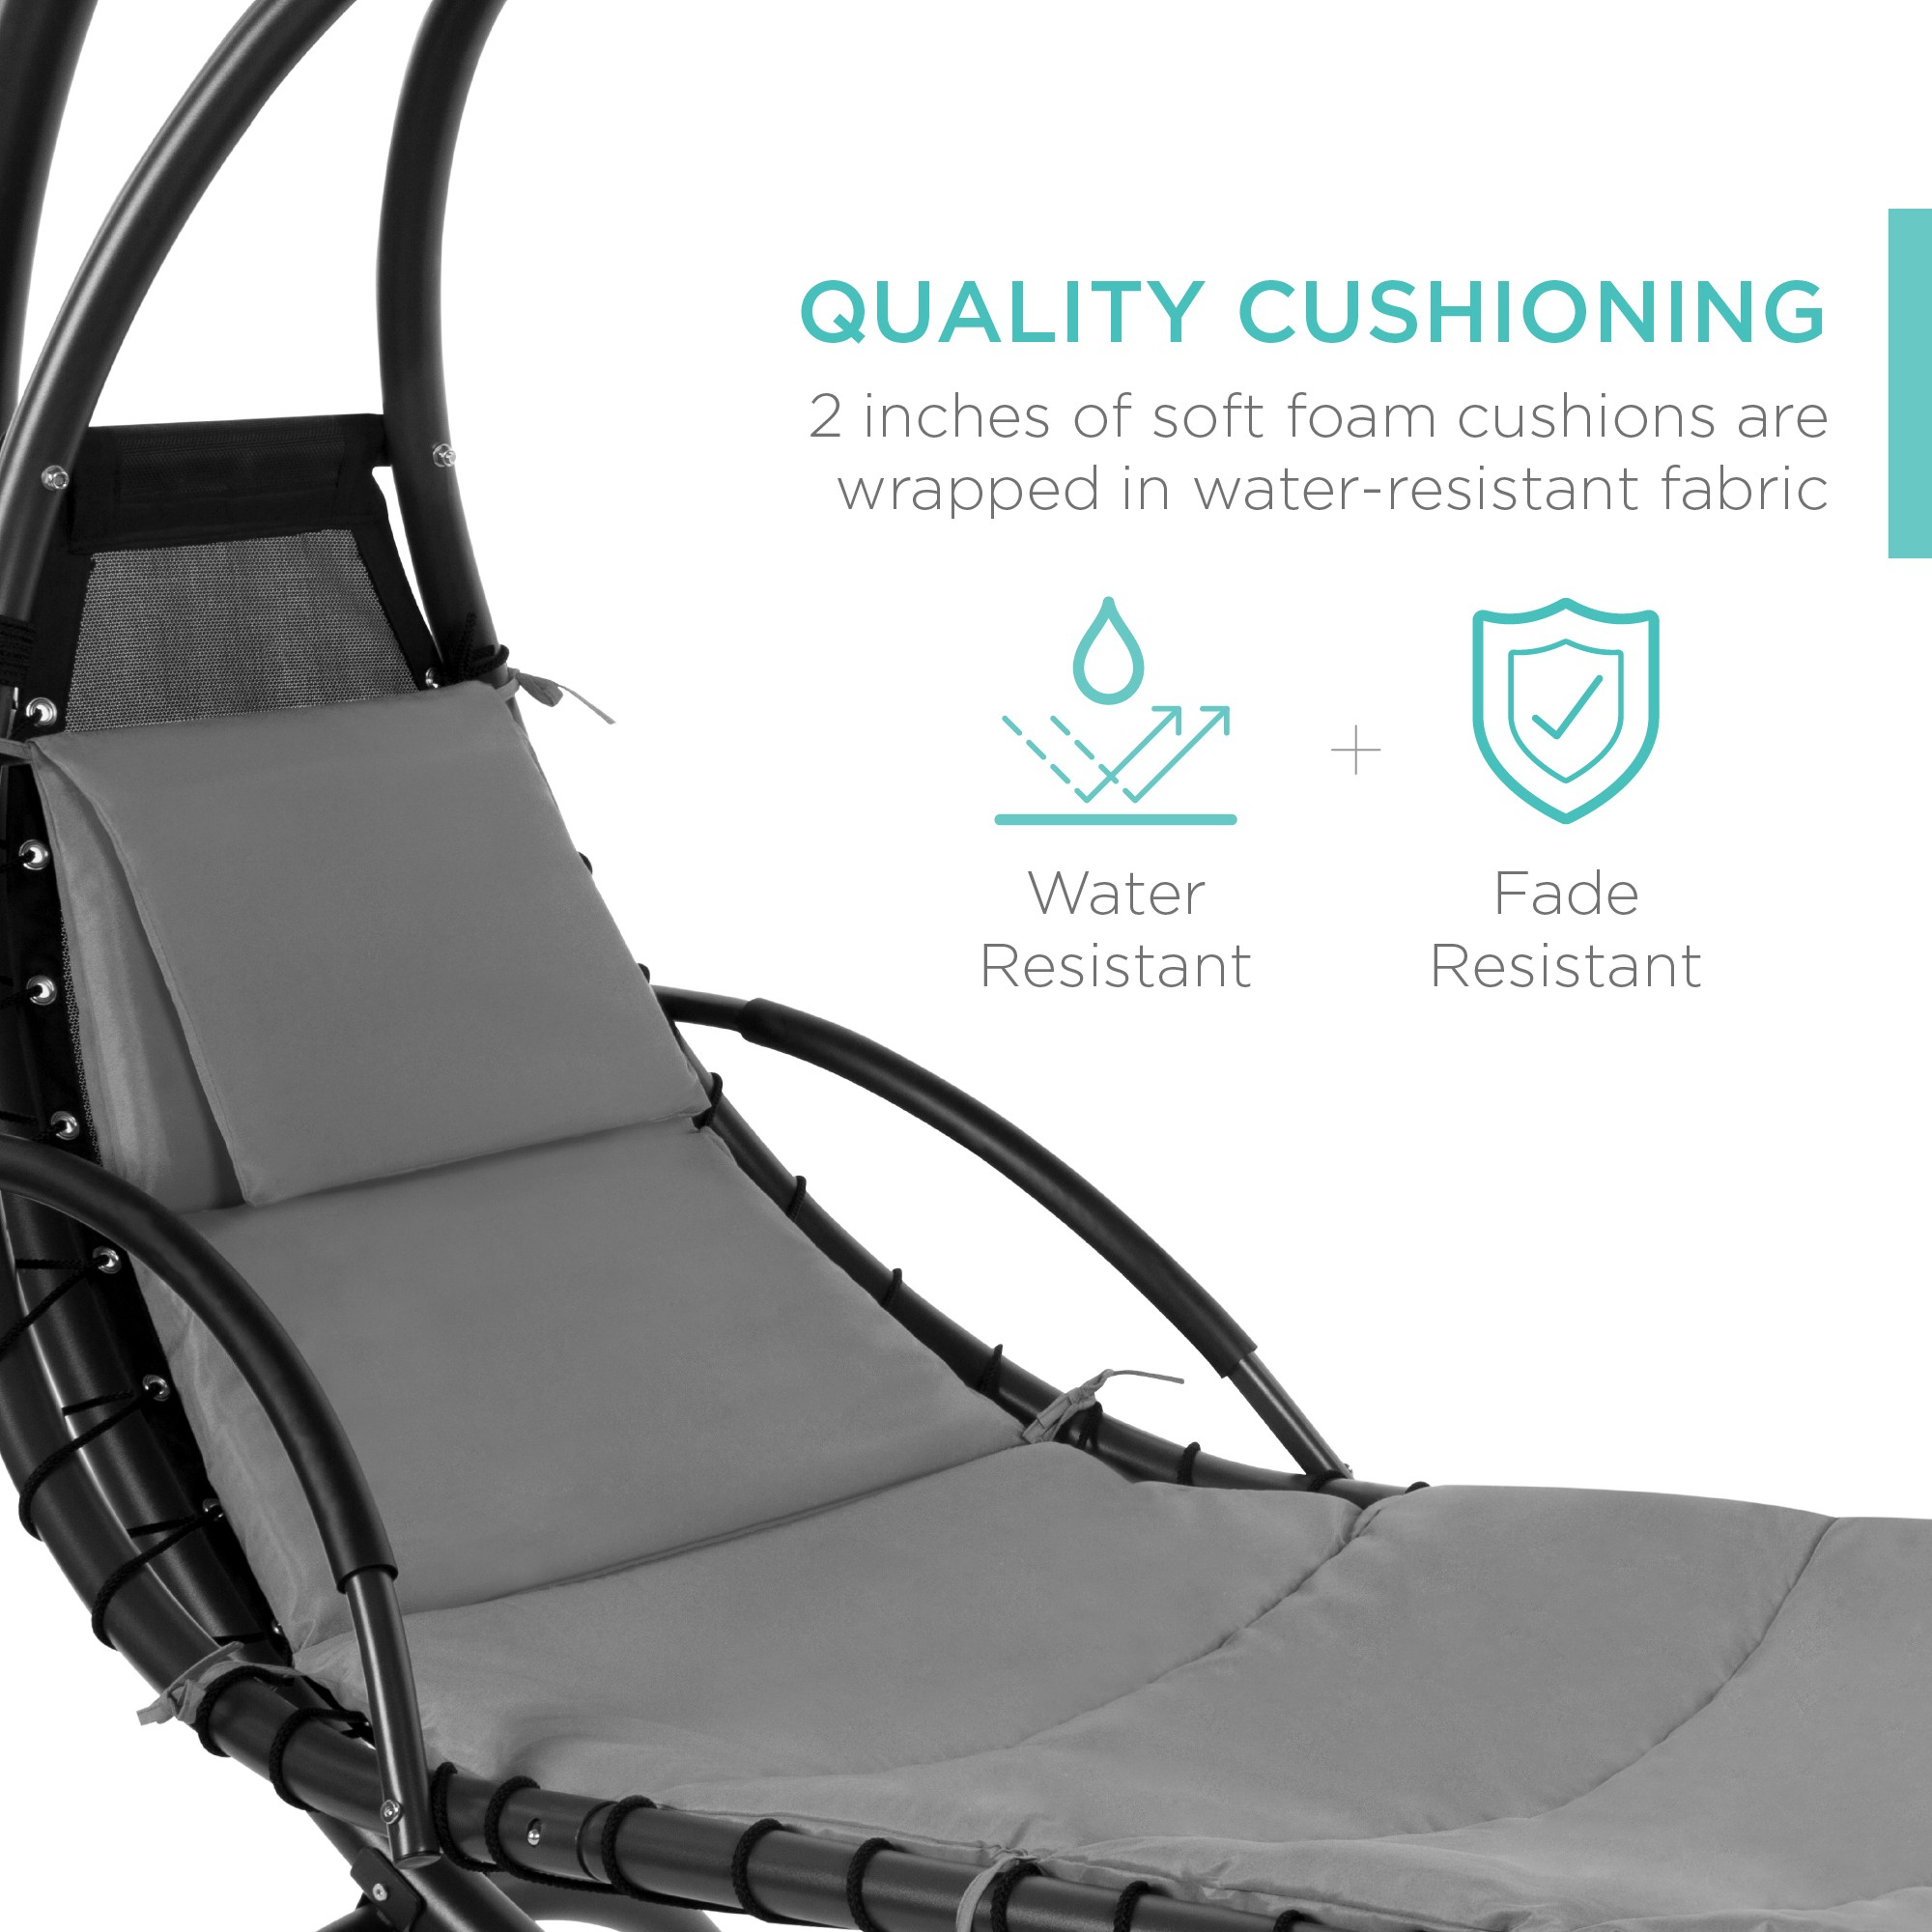 Best Choice Products Hanging Curved Chaise Lounge Chair Swing for Backyard w/ Pillow, Shade, Stand - Charcoal Gray - image 5 of 8